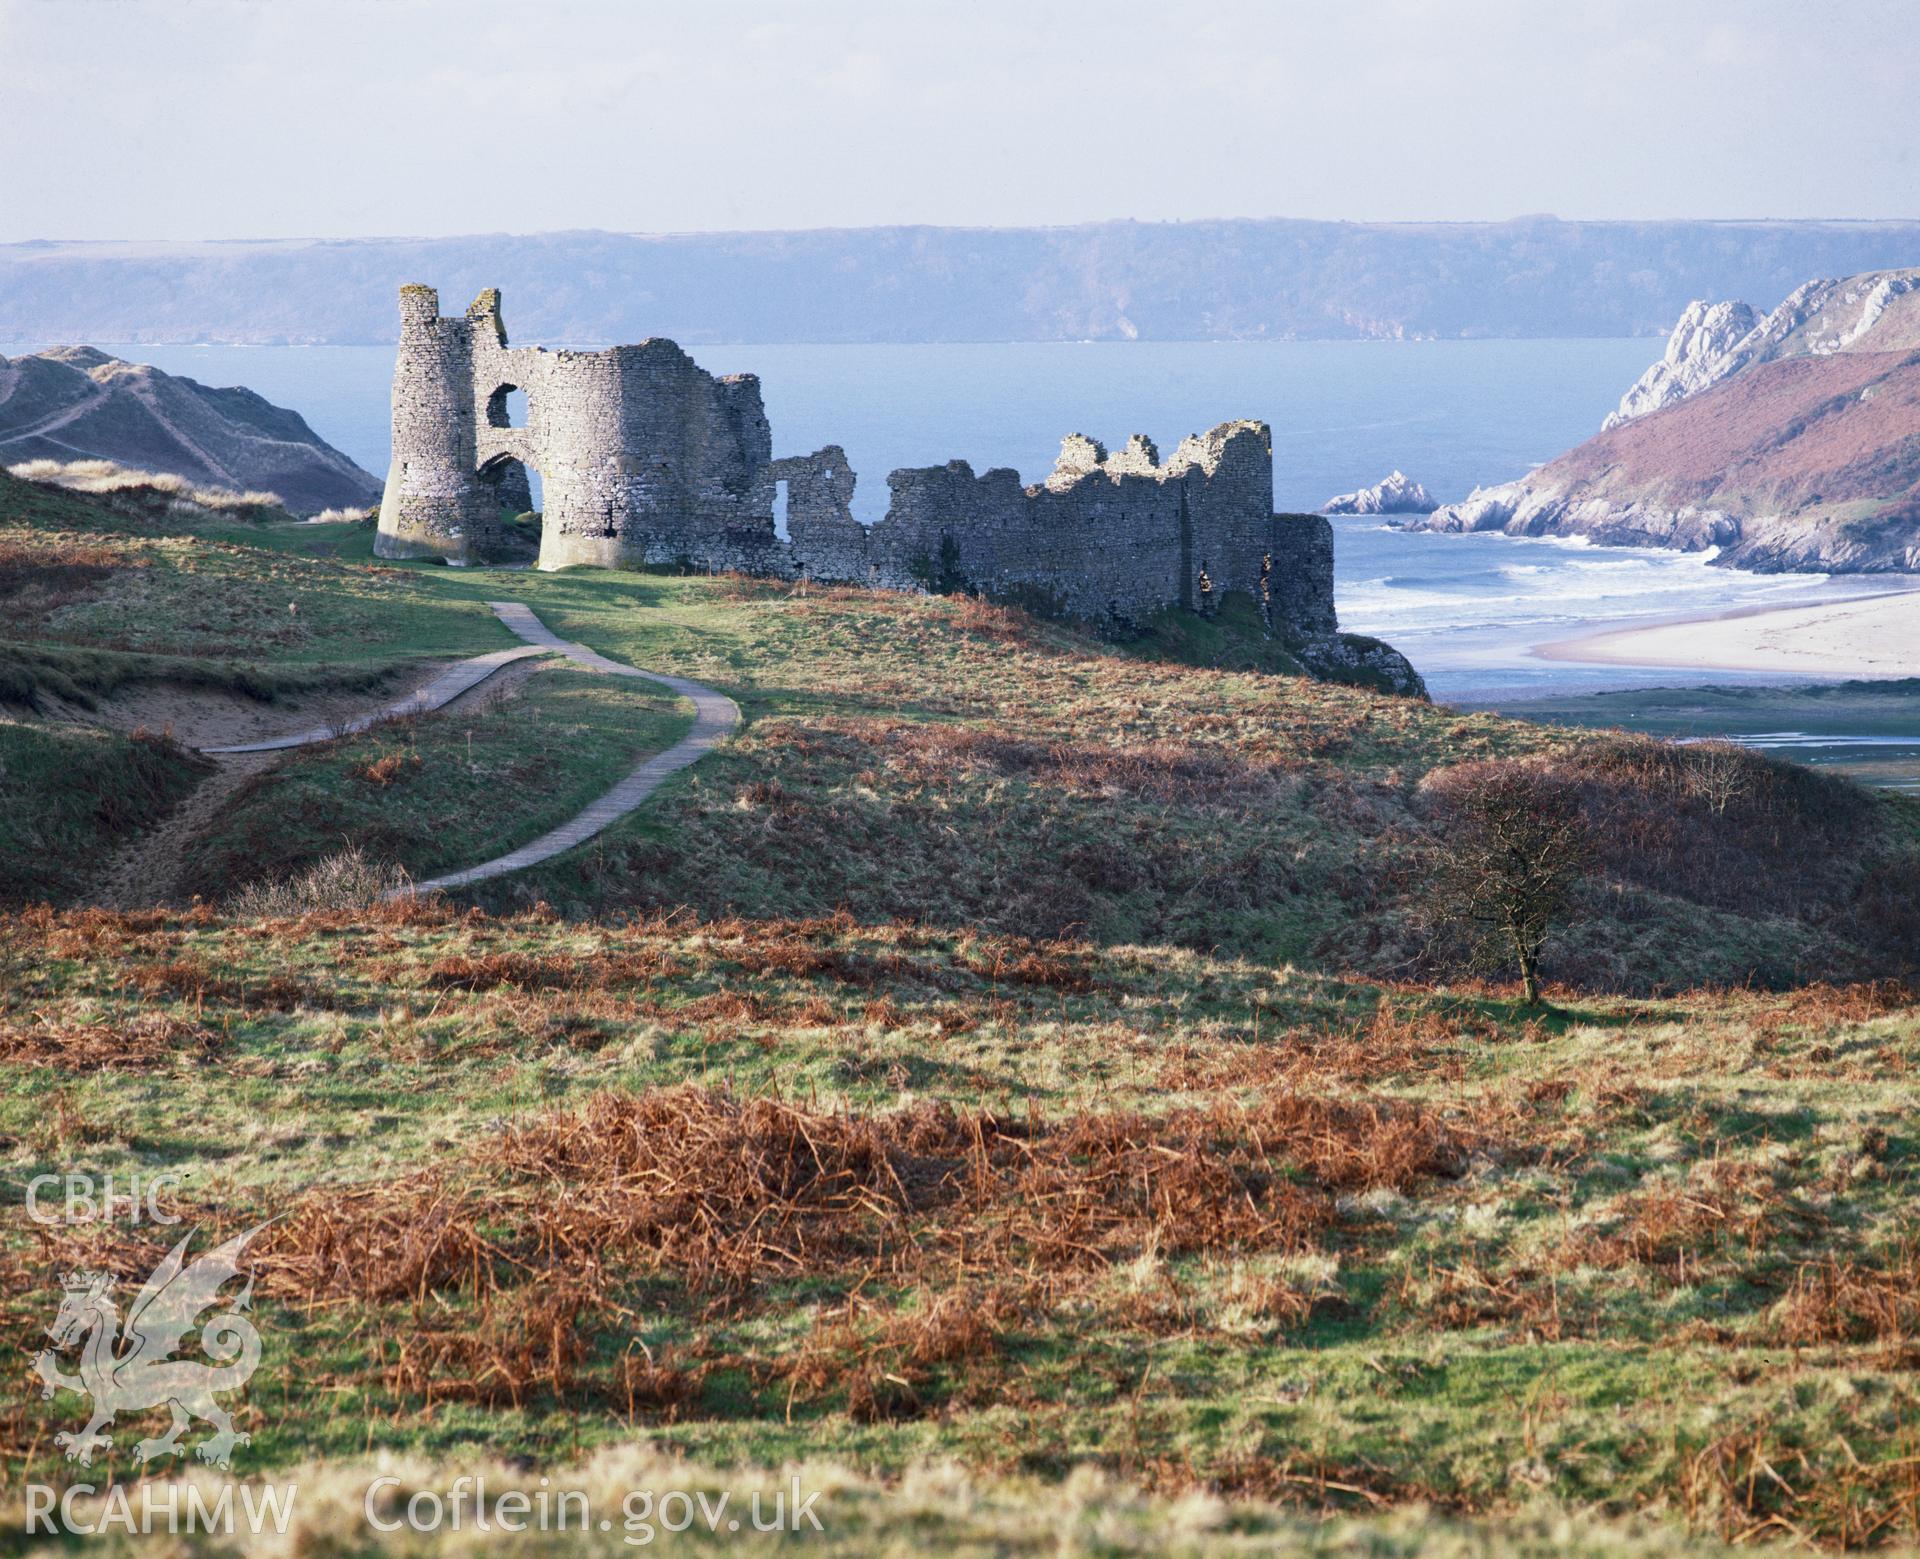 RCAHMW colour transparency showing Pennard Castle, taken by Iain Wright, c.1991